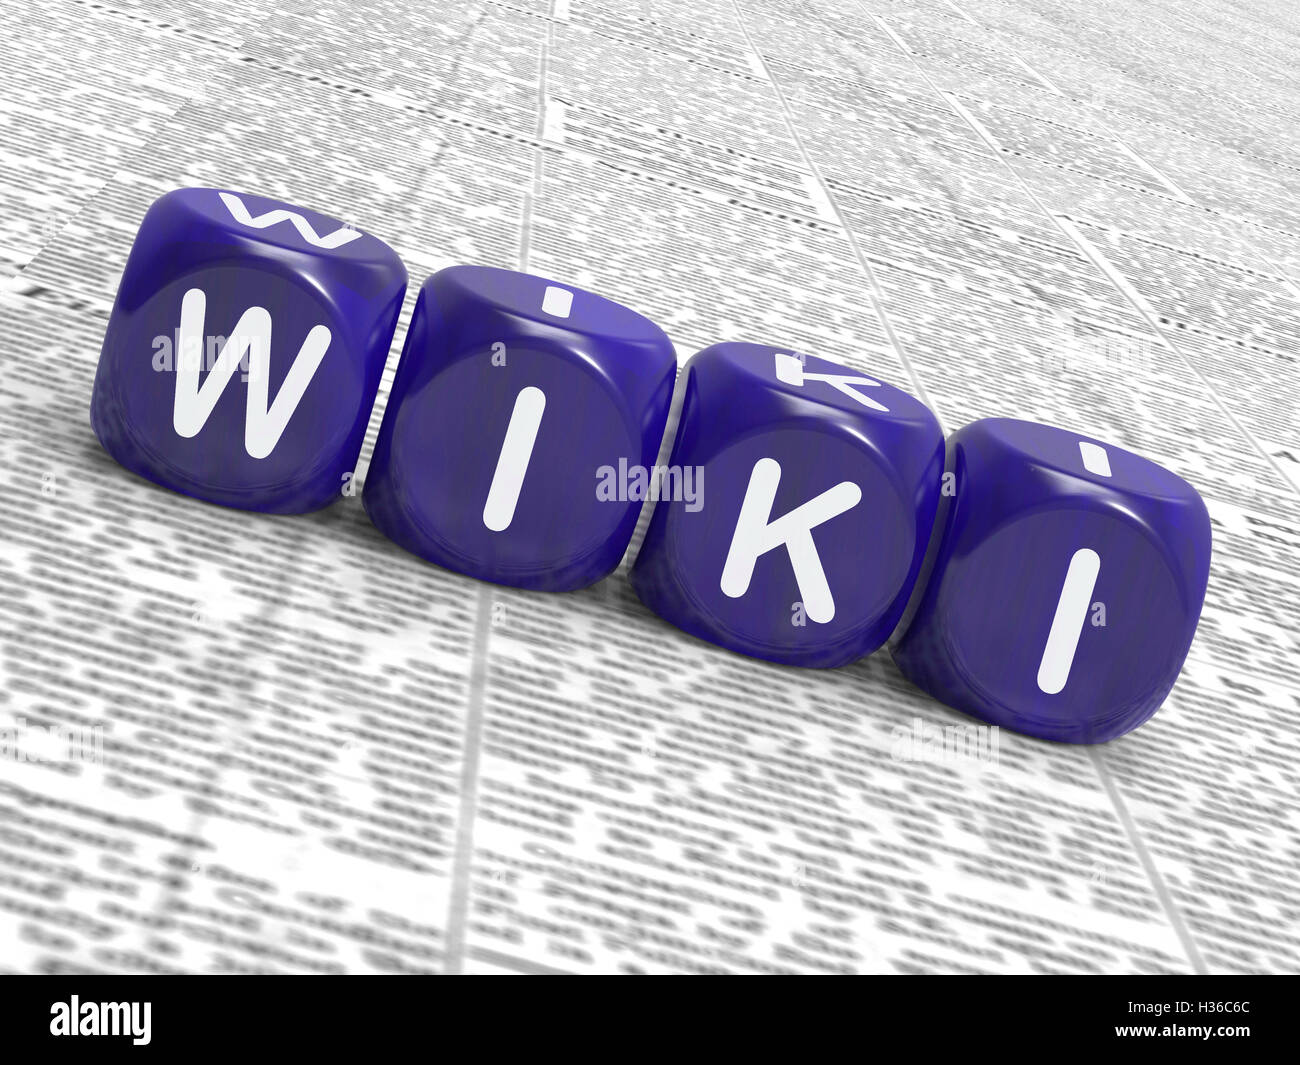 Wiki Dice Show Learning Knowledge And Encyclopaedia Stock Photo